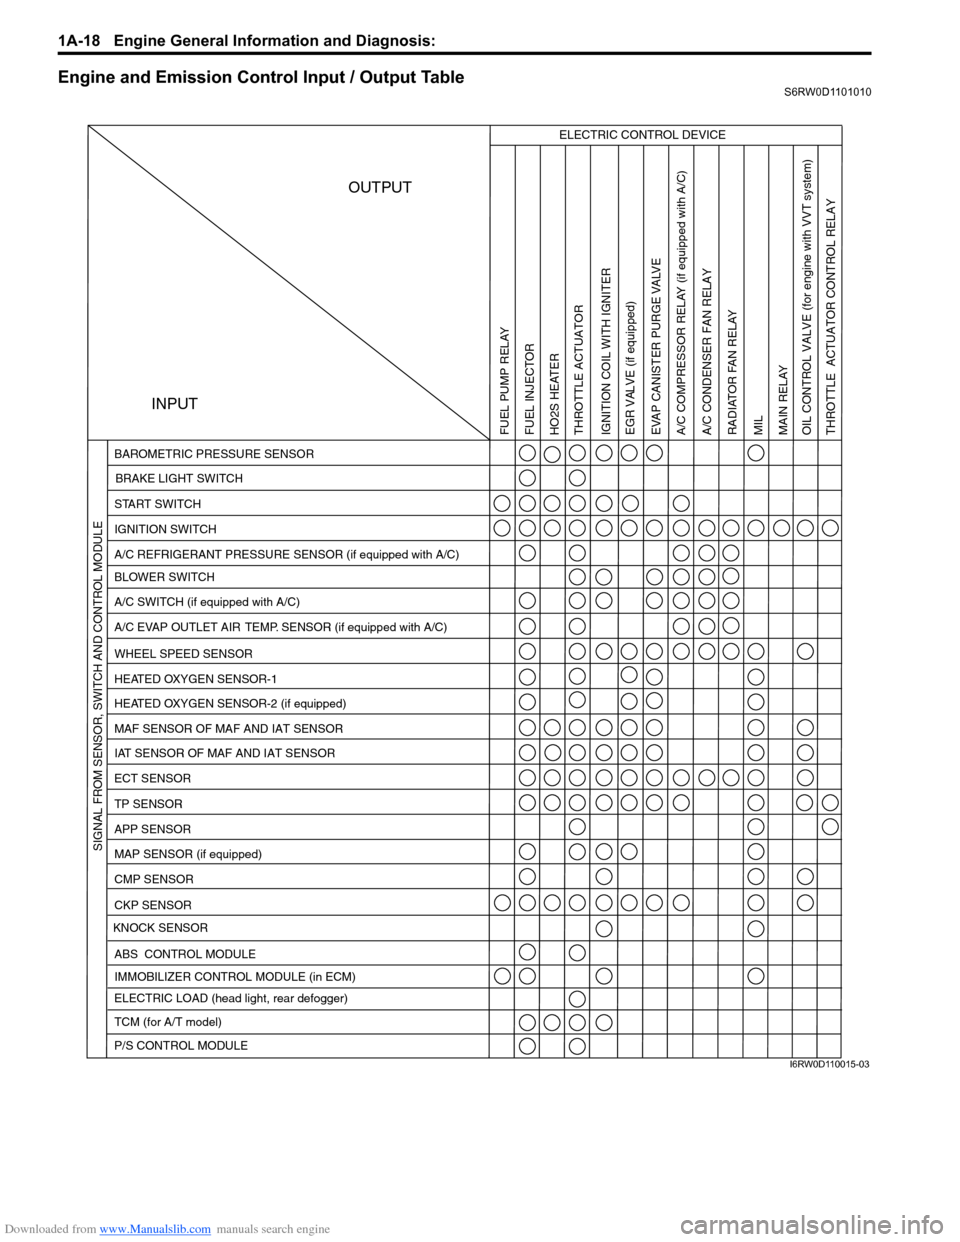 SUZUKI SX4 2006 1.G Service Owners Manual Downloaded from www.Manualslib.com manuals search engine 1A-18 Engine General Information and Diagnosis: 
Engine and Emission Control Input / Output TableS6RW0D1101010
INPUTOUTPUT
ELECTRIC CONTROL DEV